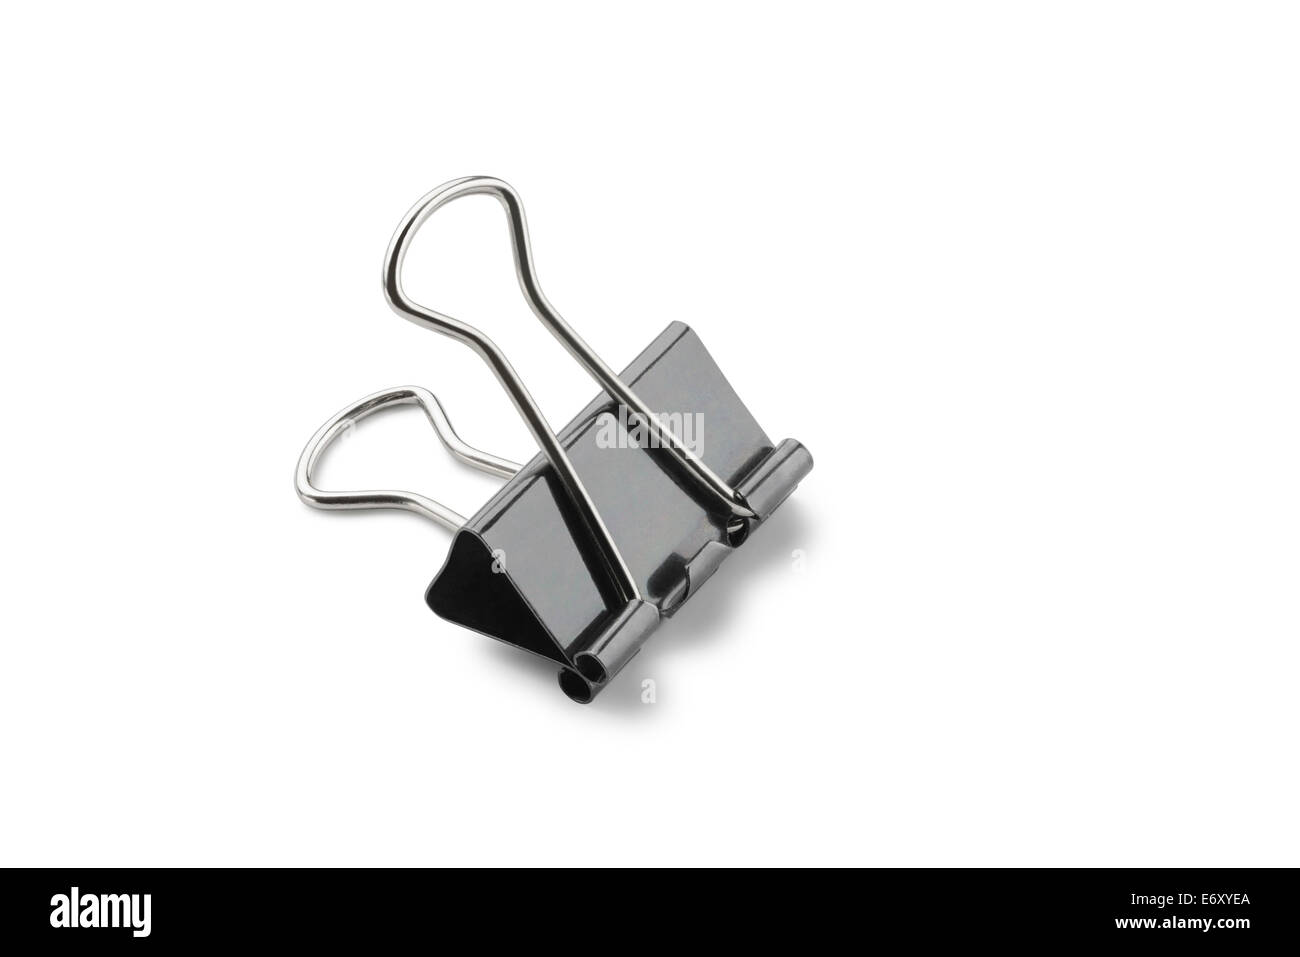 A black clip to attach documents together, isolated on white background Stock Photo